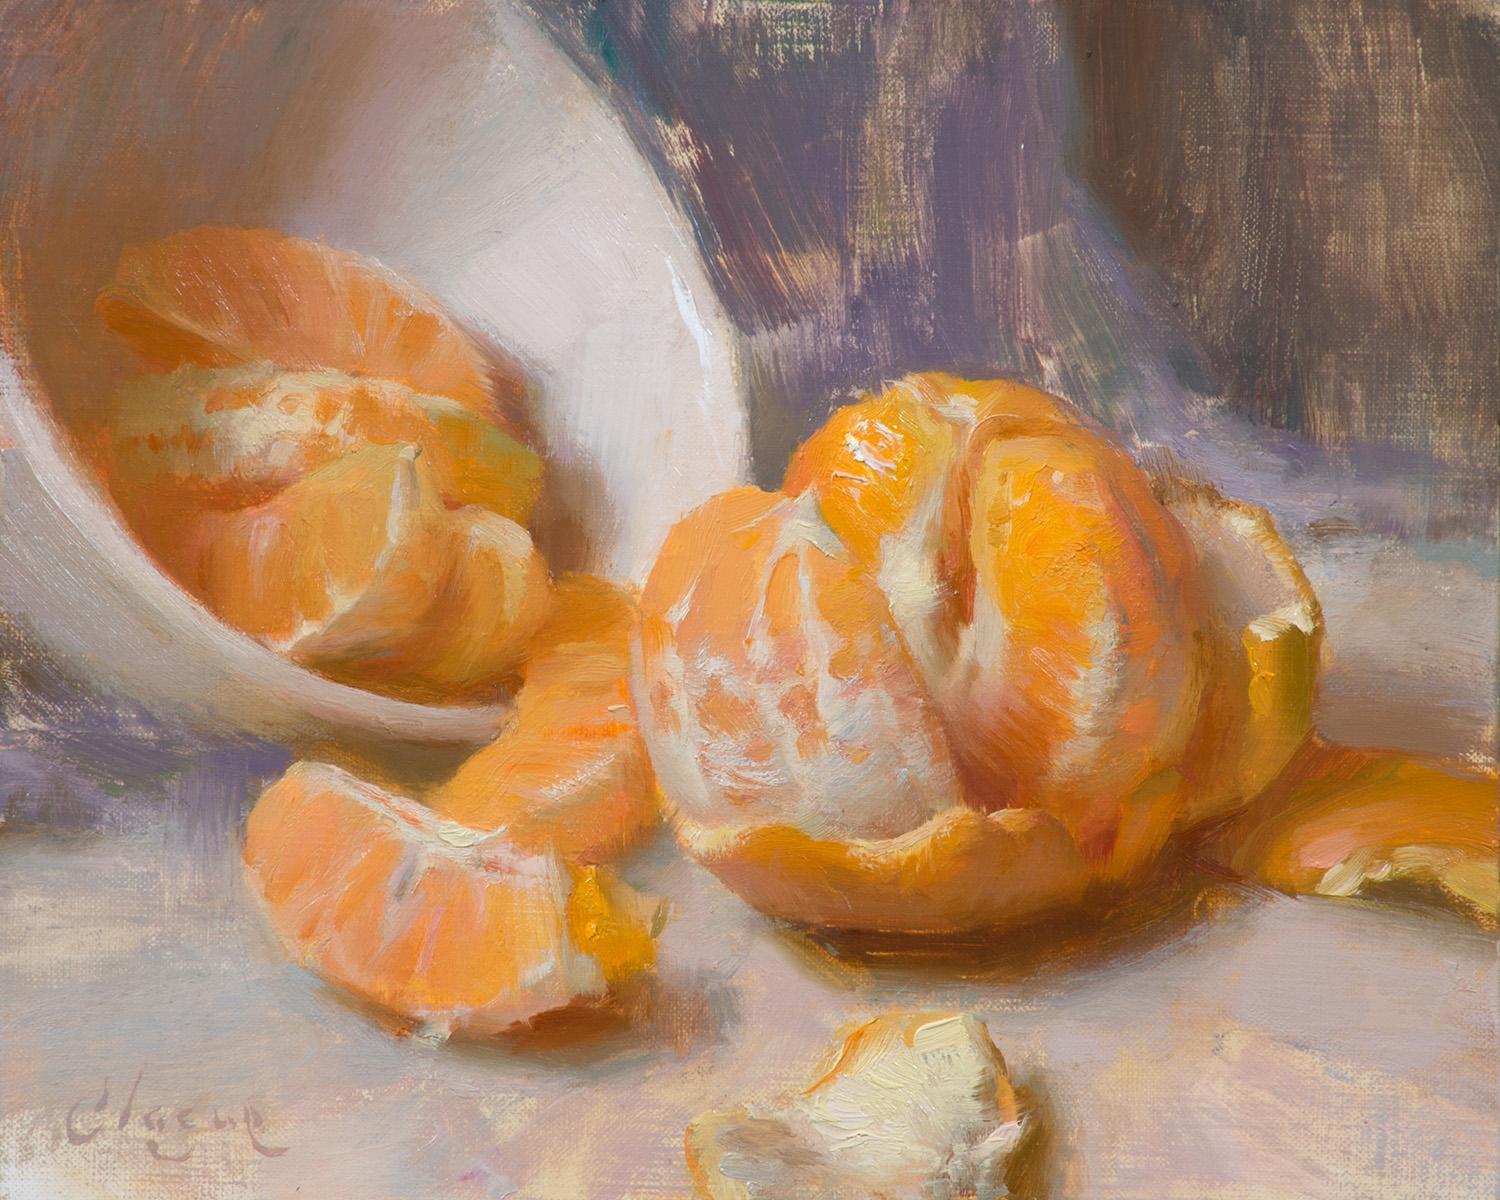 still life painting of an orange - Adam Clague, "Halves and Segments," 8 x 10 in., oil